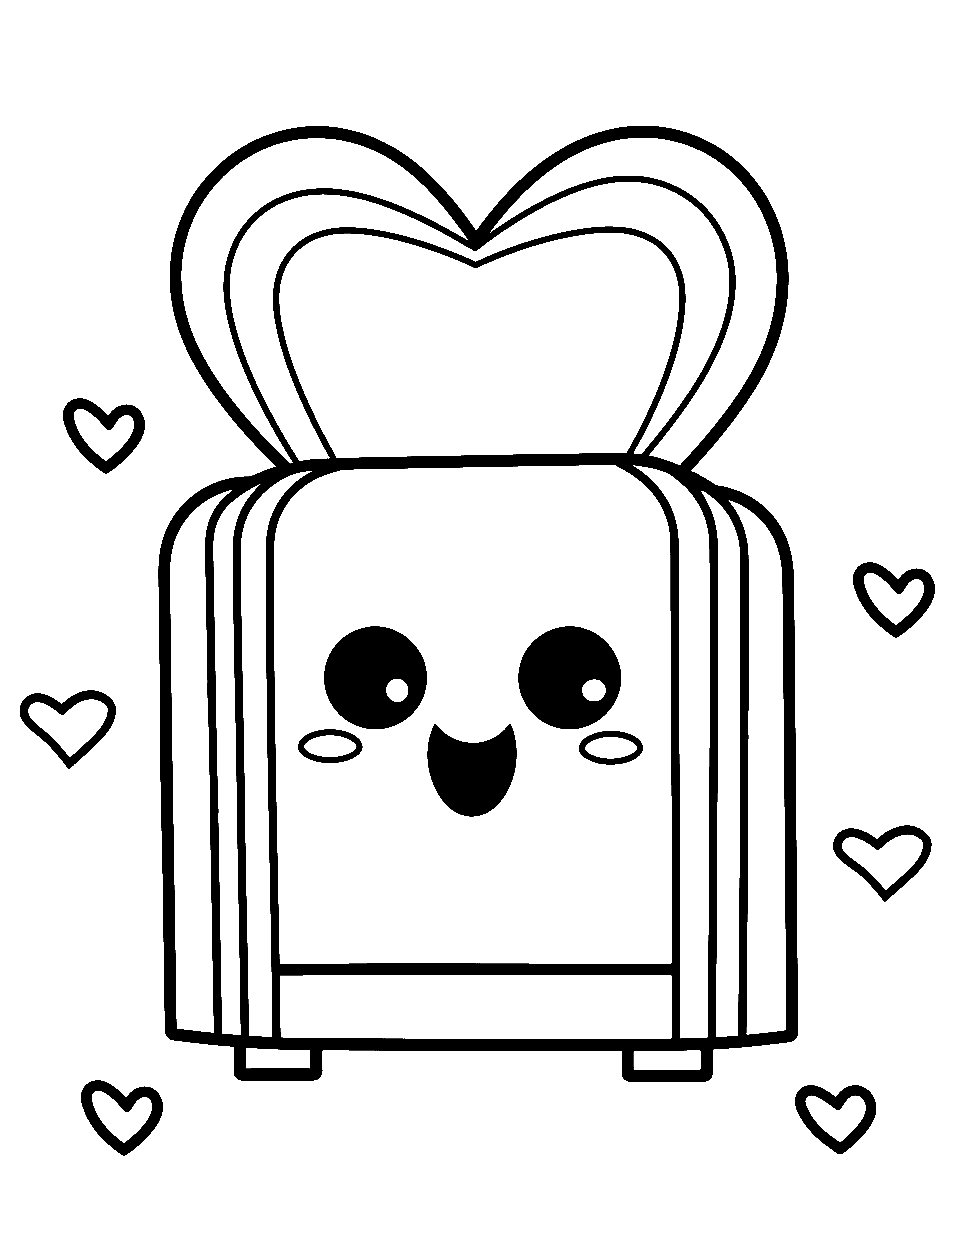 Kawaii Toaster Popping Heart Toast Coloring Page - A toaster with heart toast popping out.